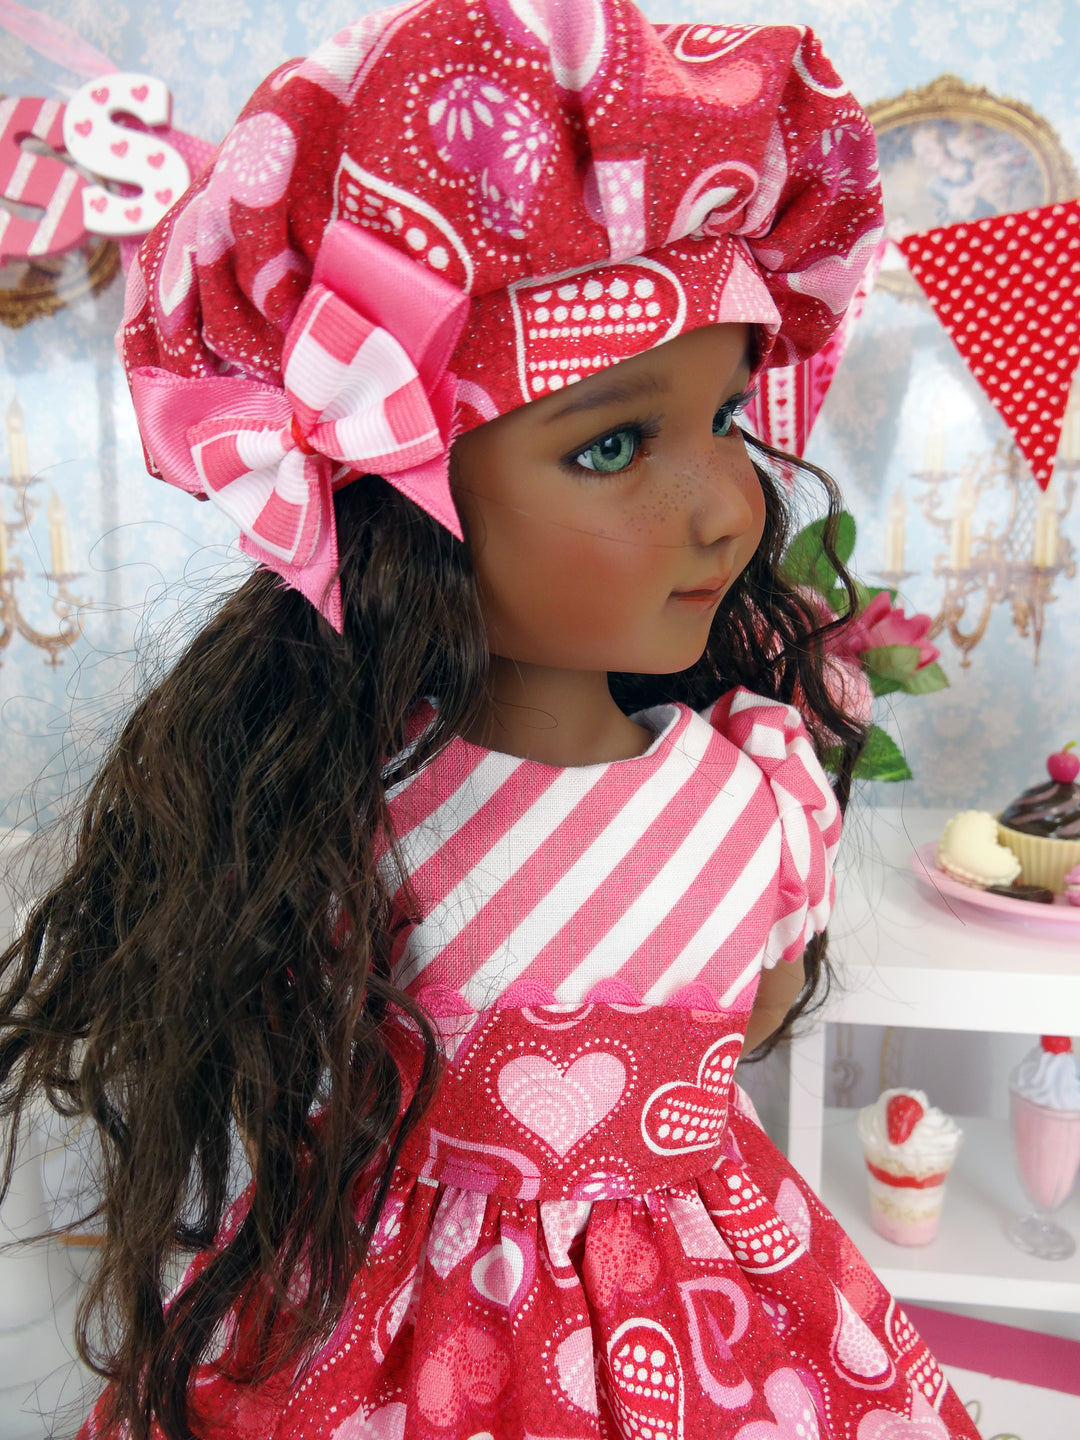 Fluttering Hearts - dress ensemble with shoes for Ruby Red Fashion Friends doll